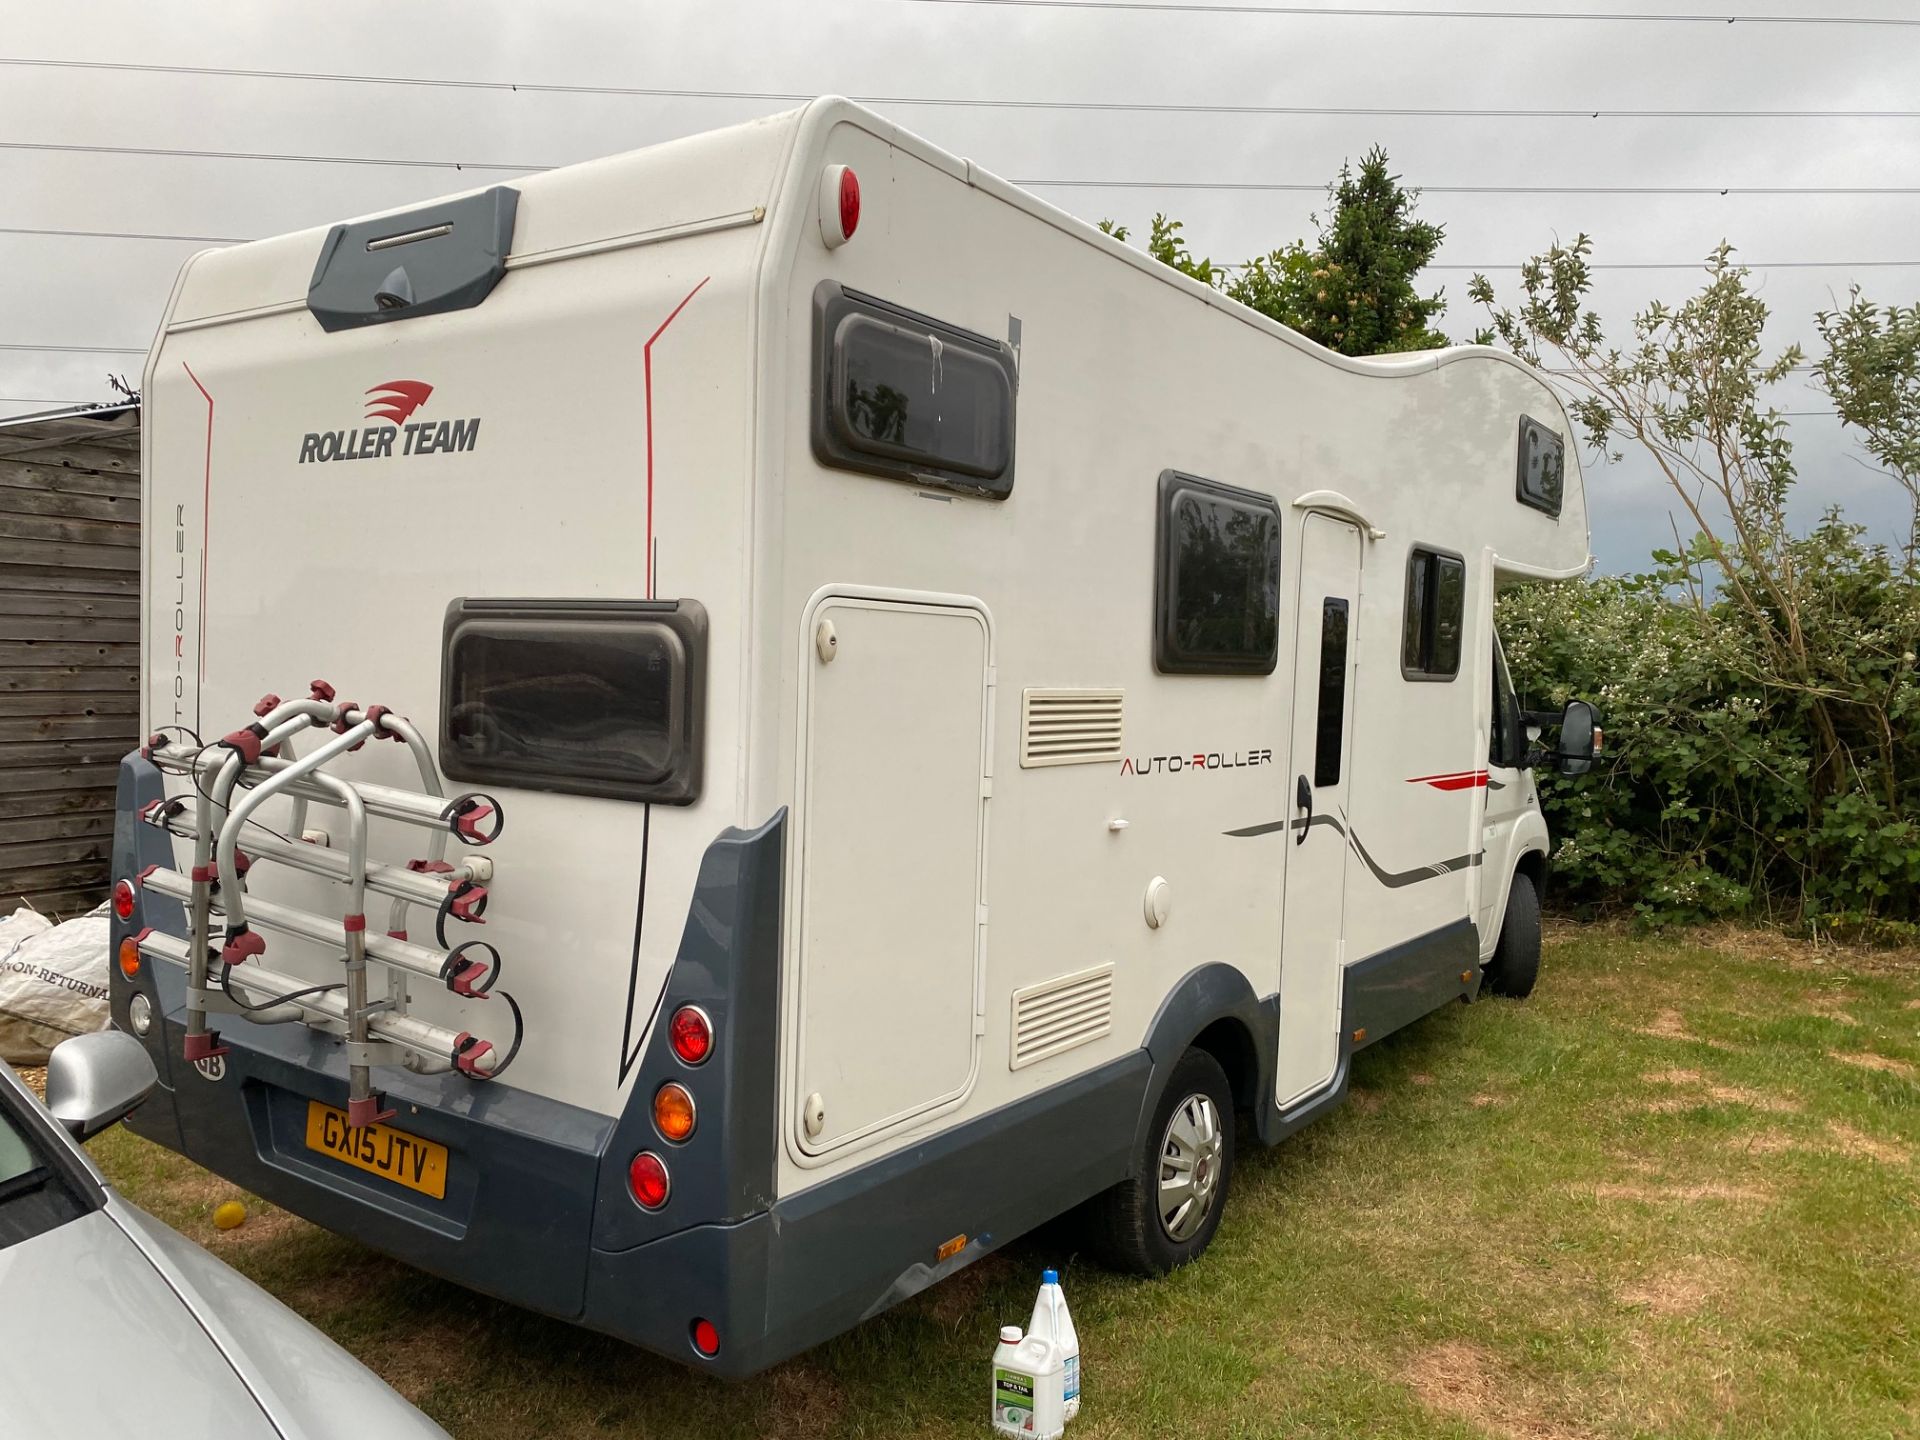 2015 FIAT ROLLERTEAM AUTO-ROLLER 707 7 BERTH MOTORHOME, 30,800 MILES, REALLY NICE CONDITION - Image 3 of 12